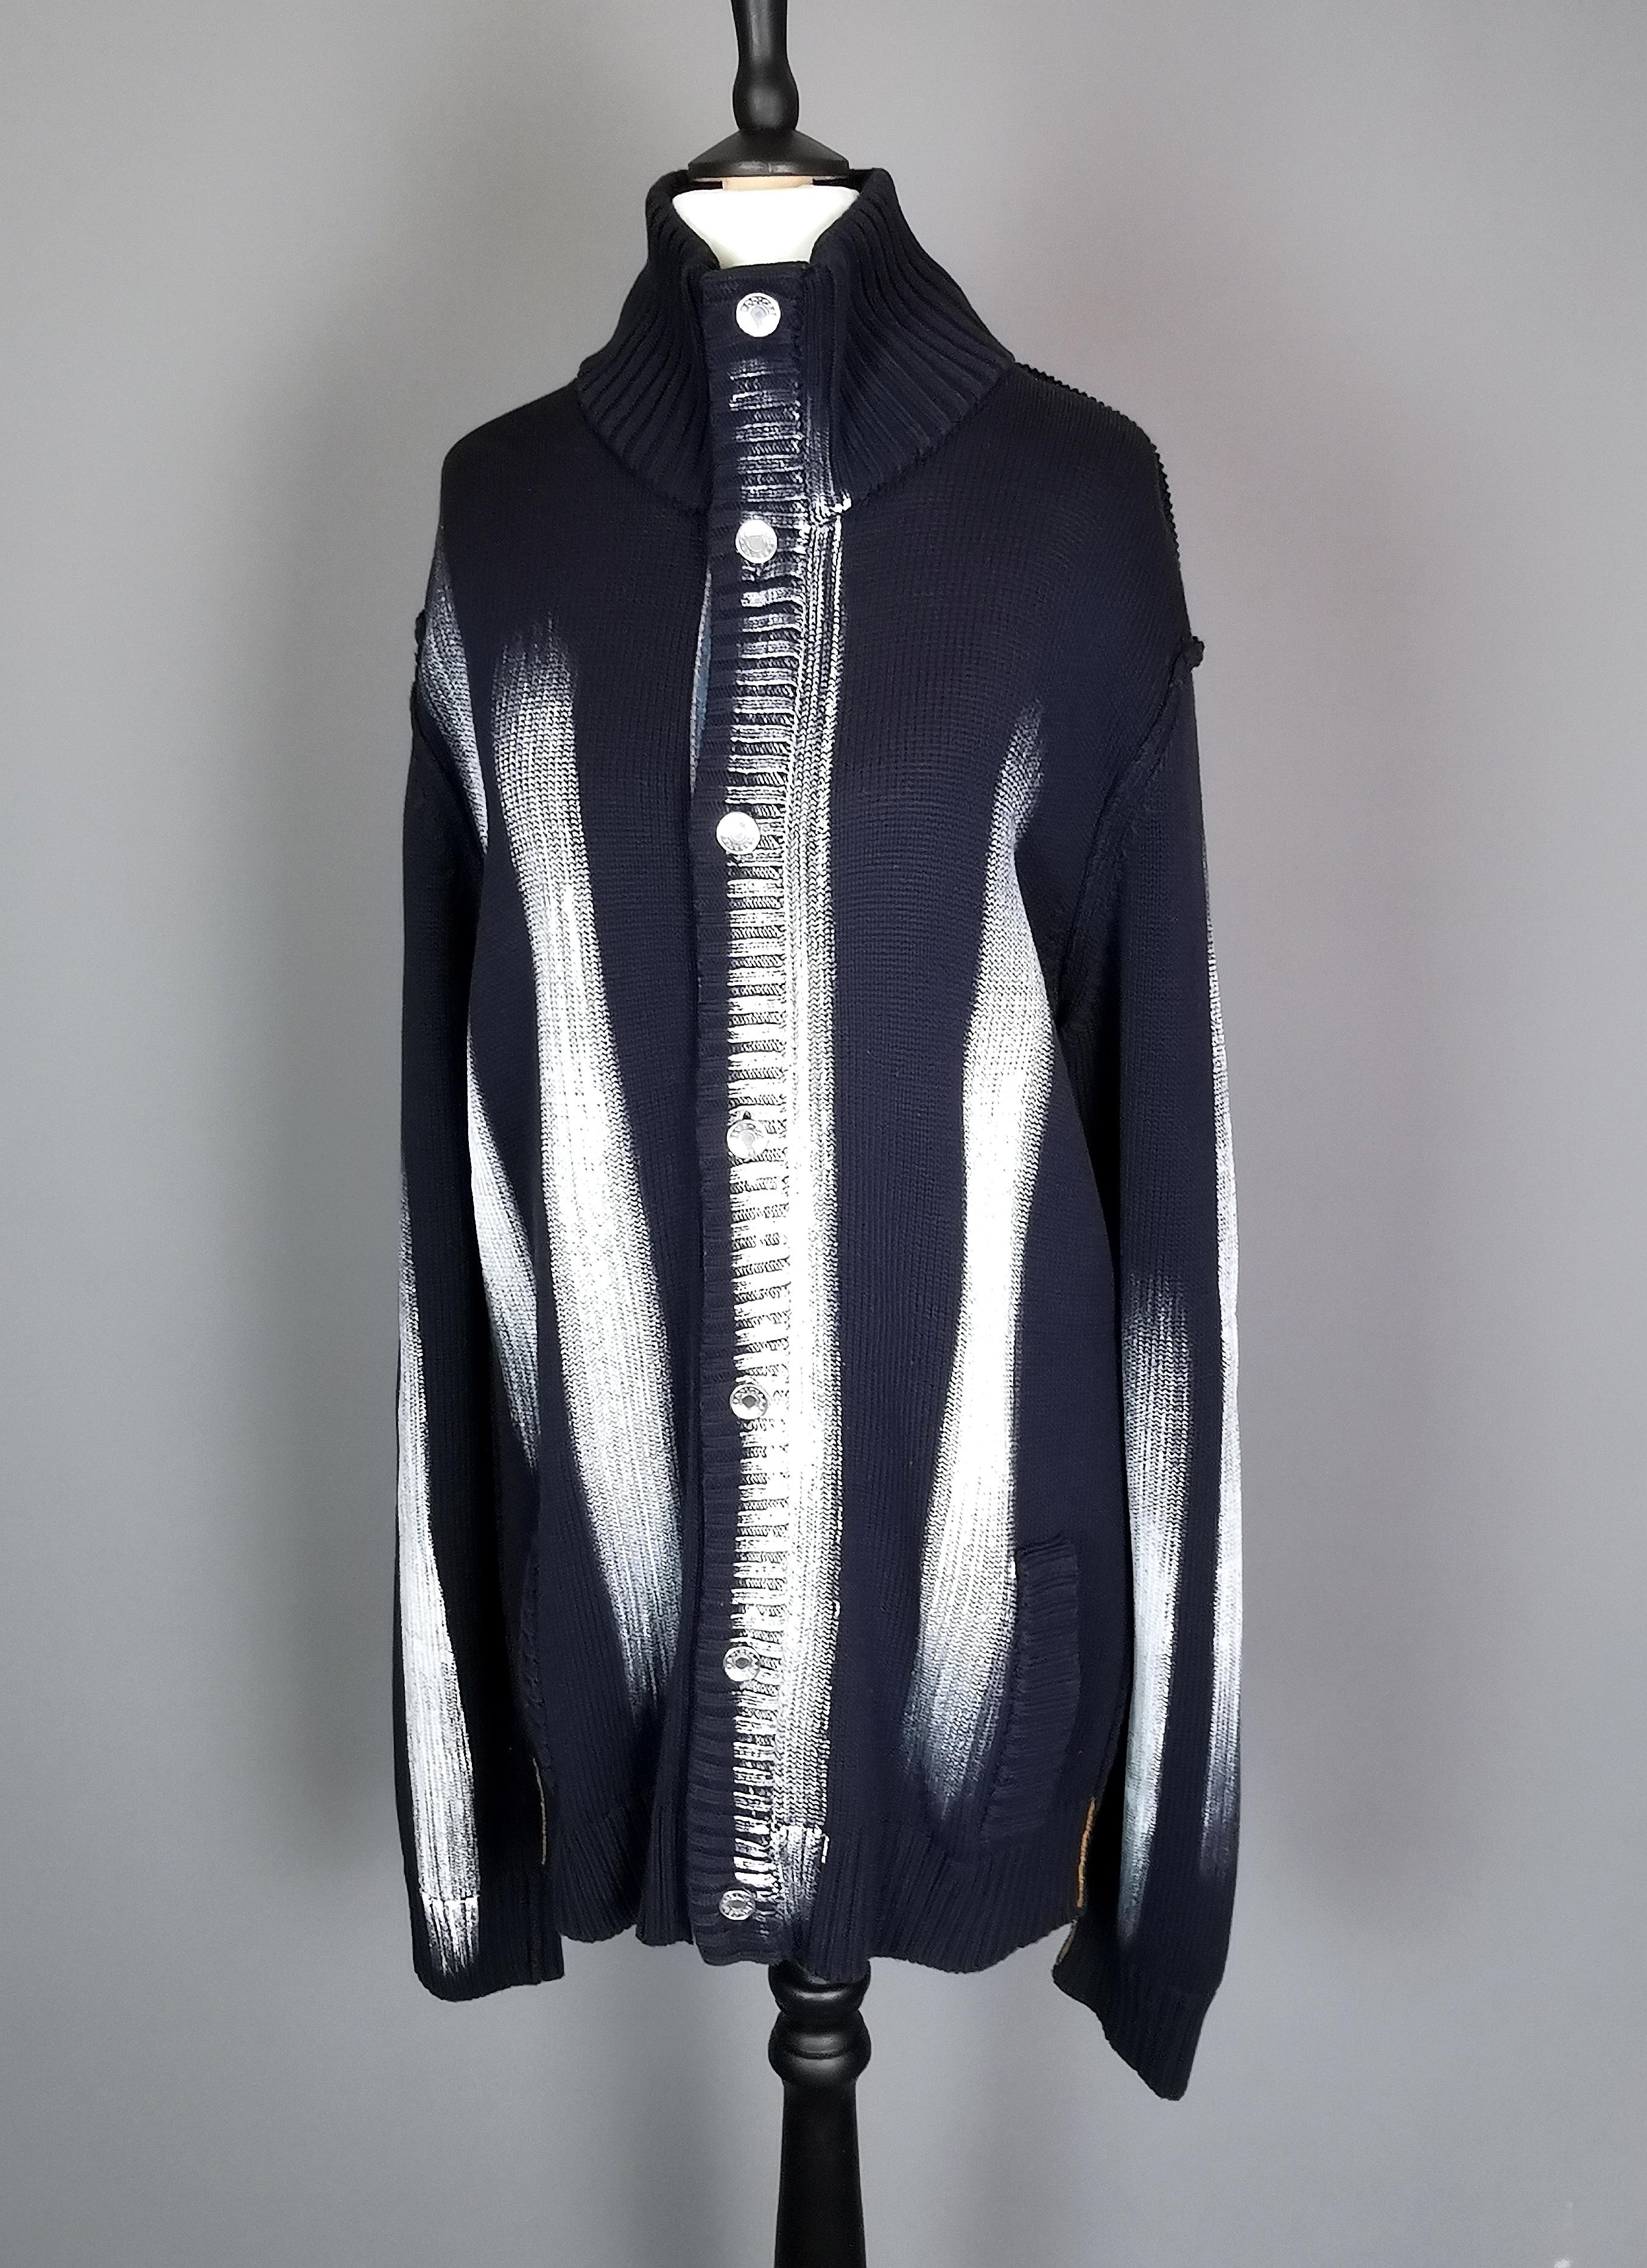 A rare vintage mens Dolce and Gabbana paint stripe cardigan.

Dark navy blue wool mix in a chunky knit with a striking white 'paint' stripe design front and back.

It has a denim trim down the front and silver tone metal buttons with the Dolce and